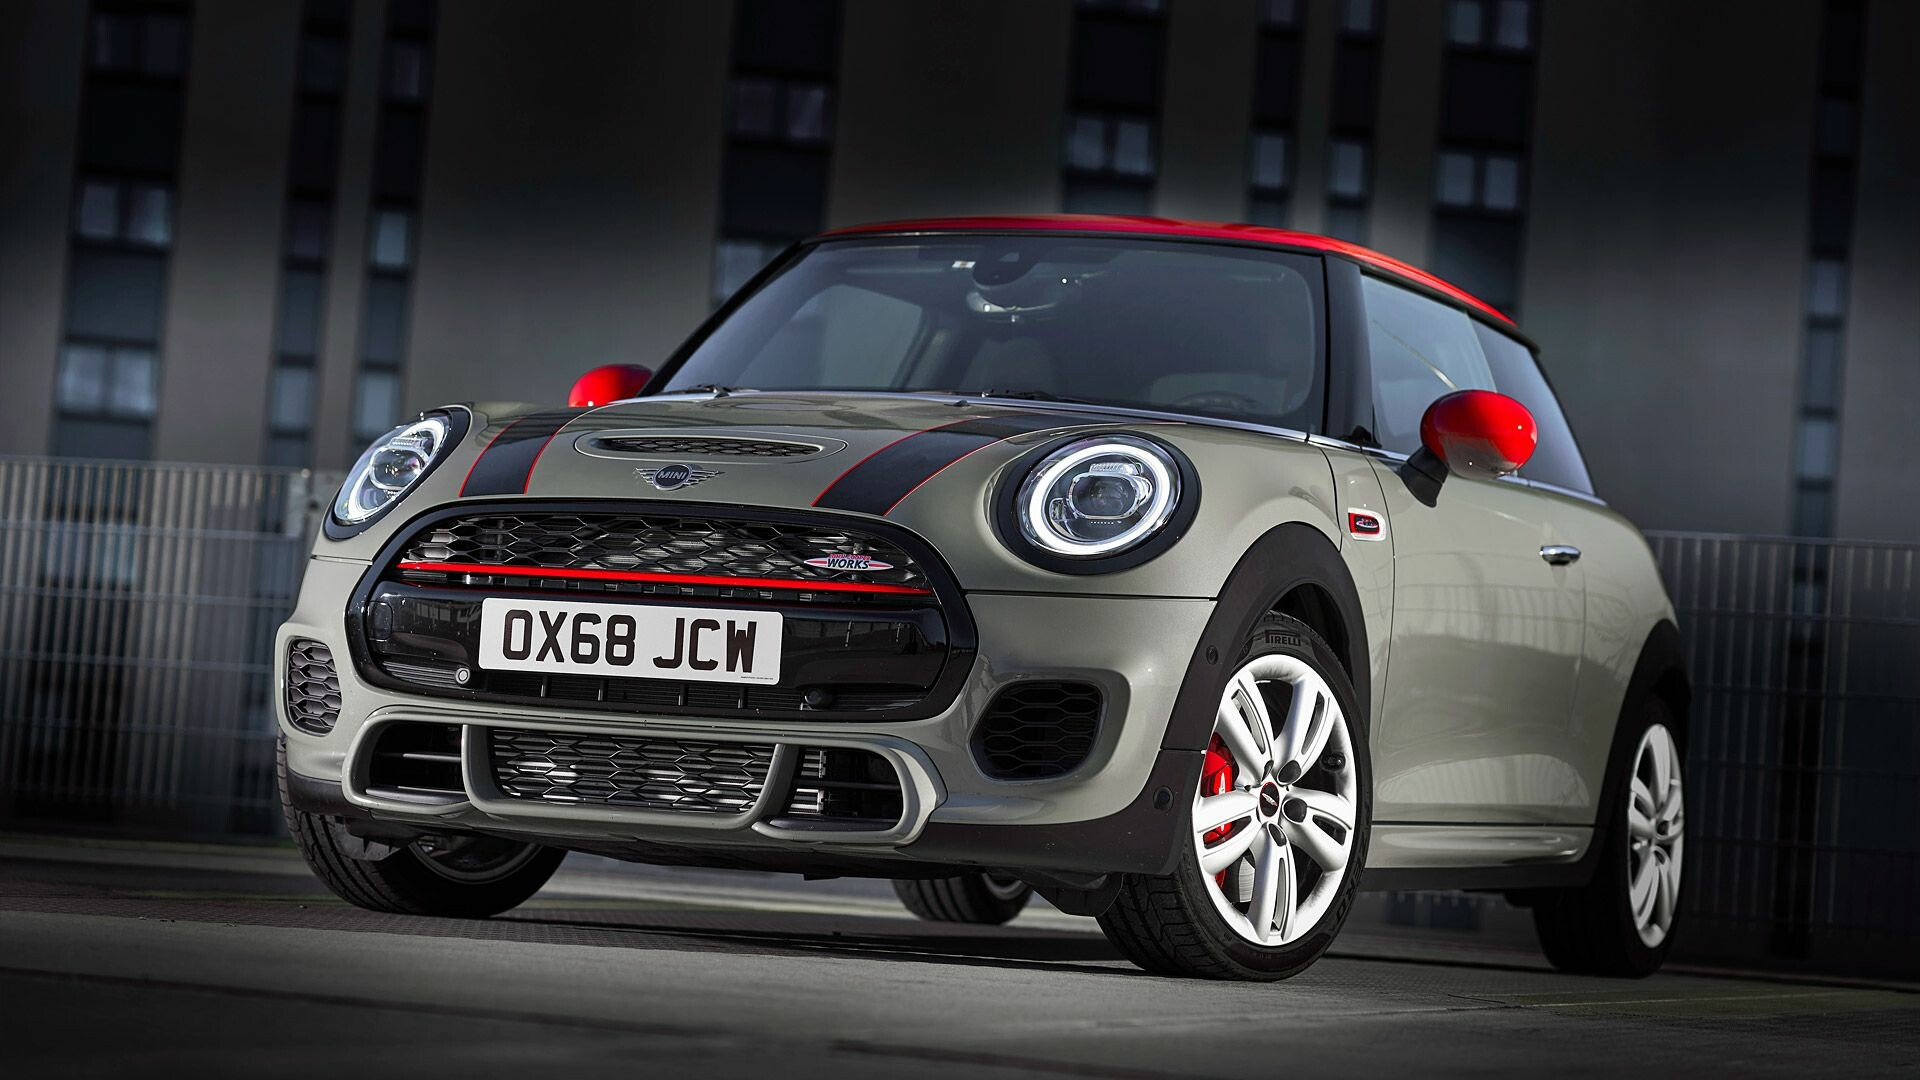 MINI Cooper: John Cooper Works, The brand revealed the Coupe in June 2011. 1920x1080 Full HD Background.